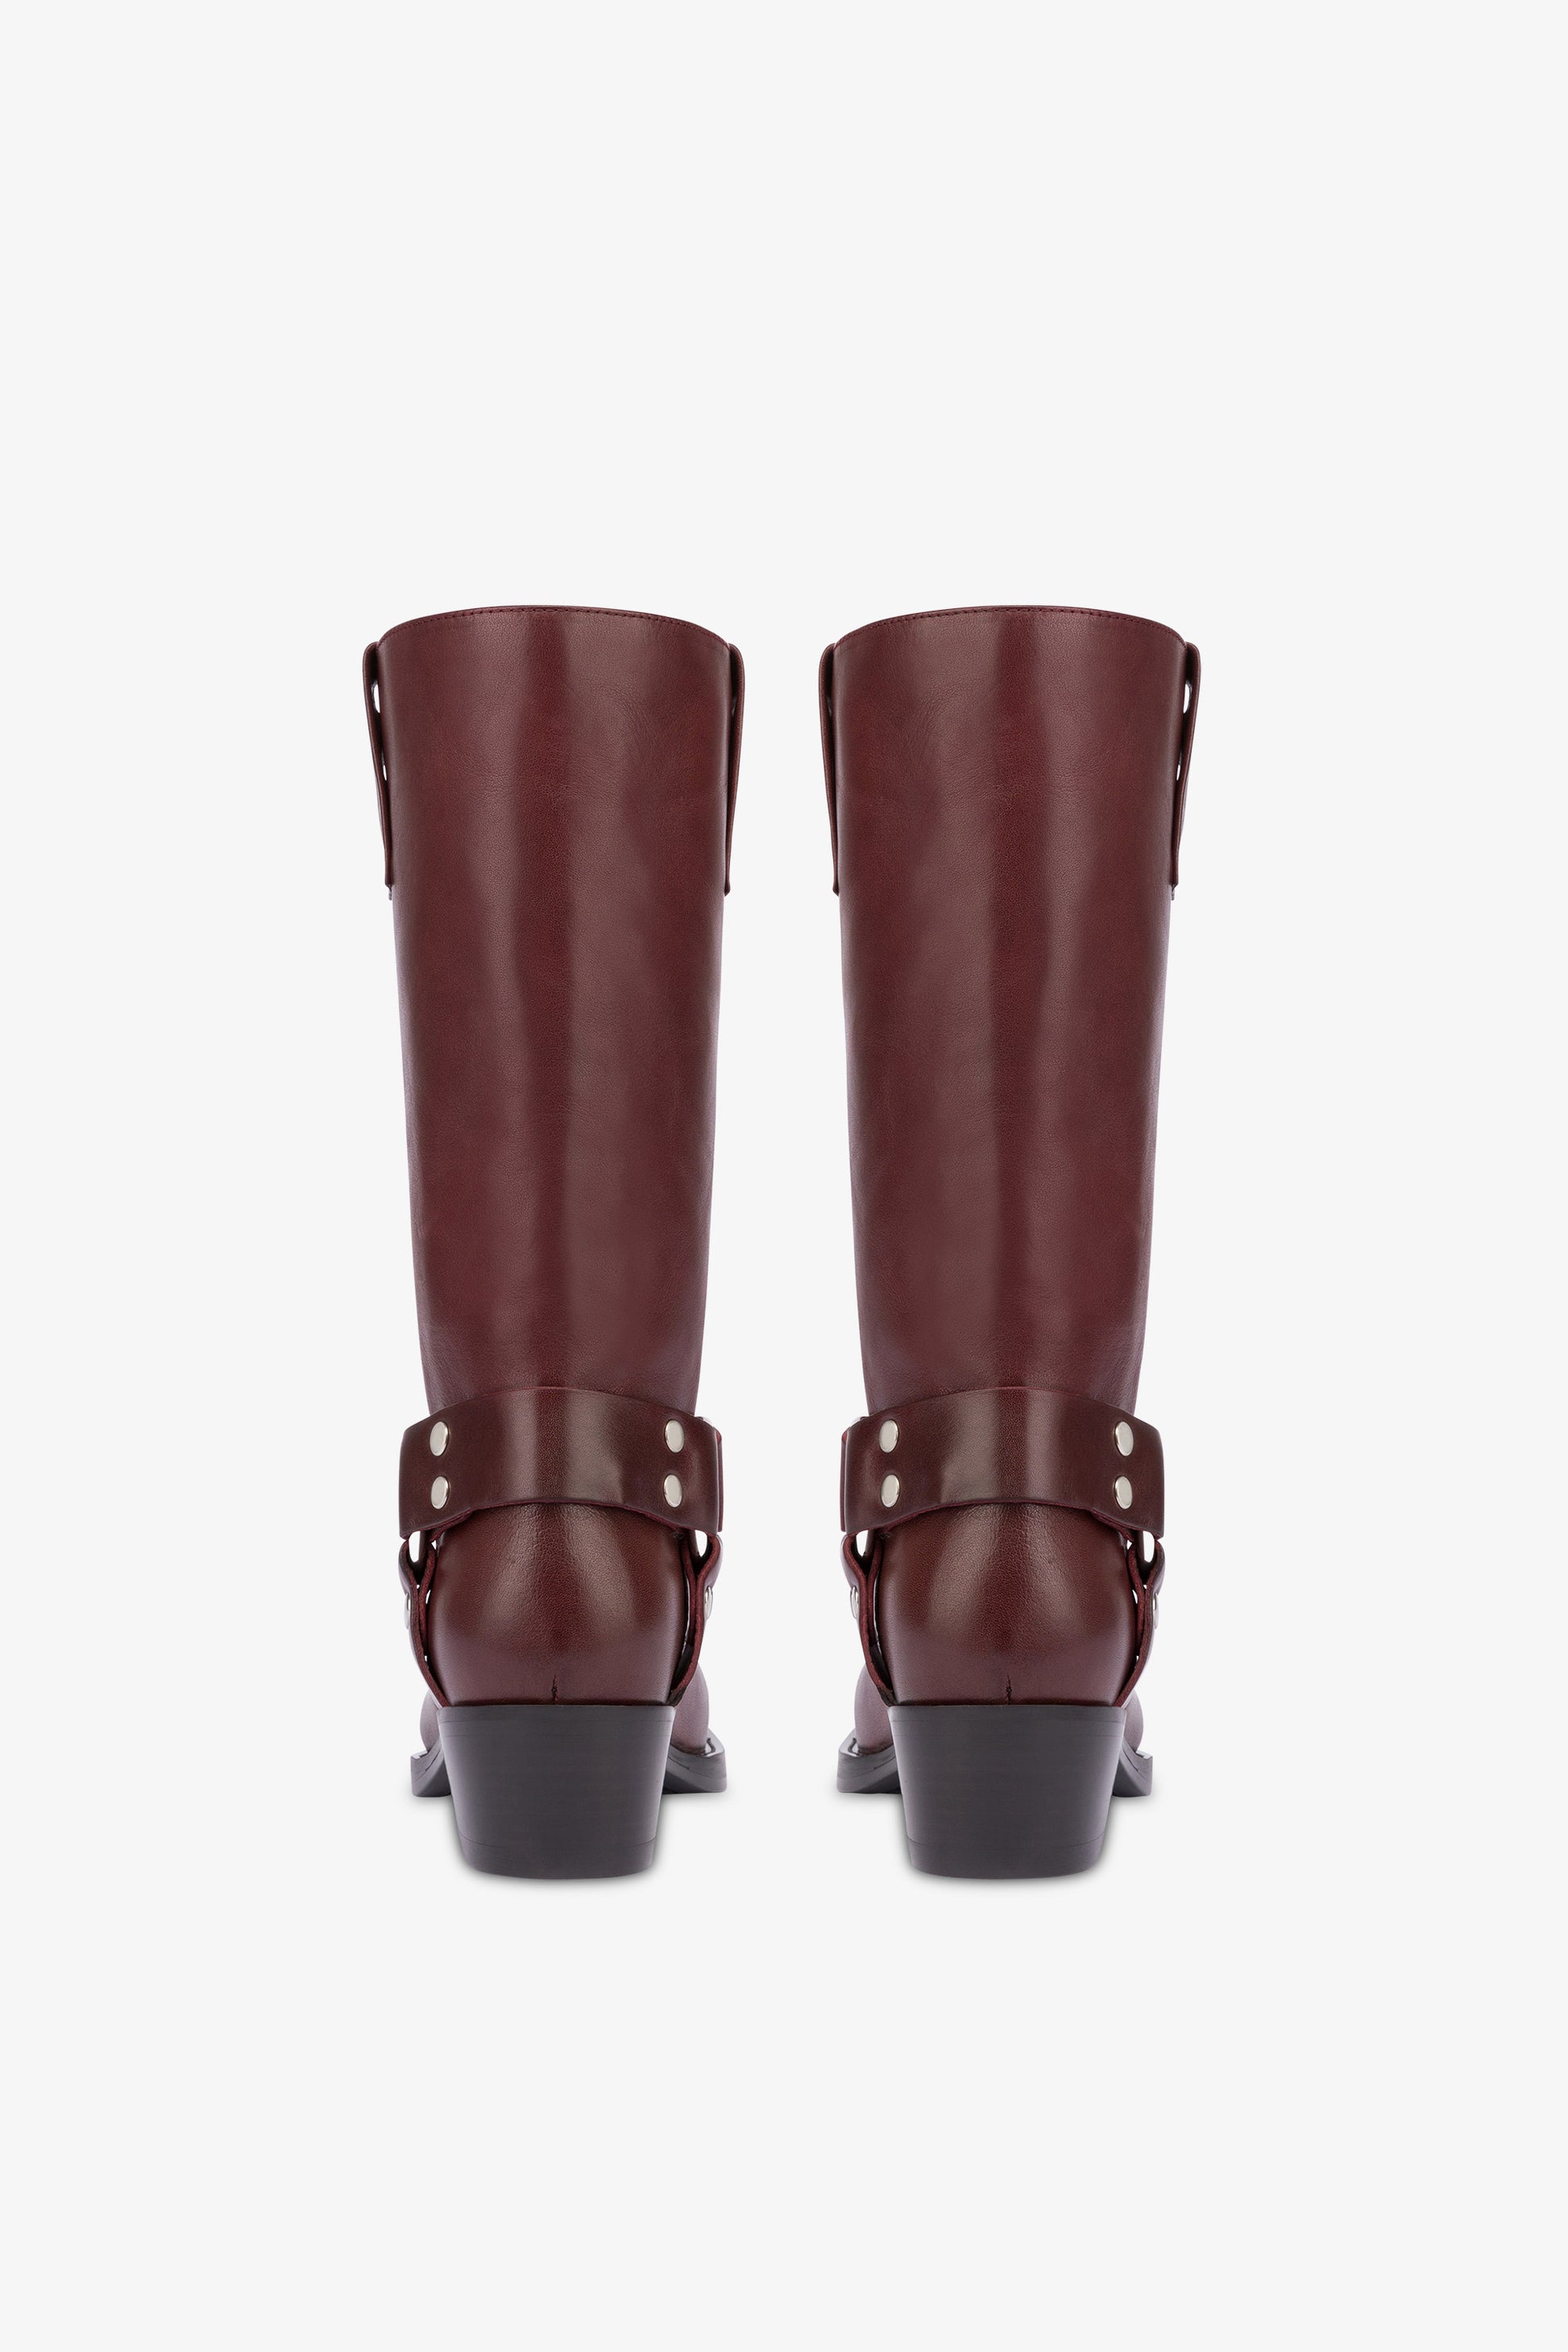 Square-toe boots in smooth plum leather